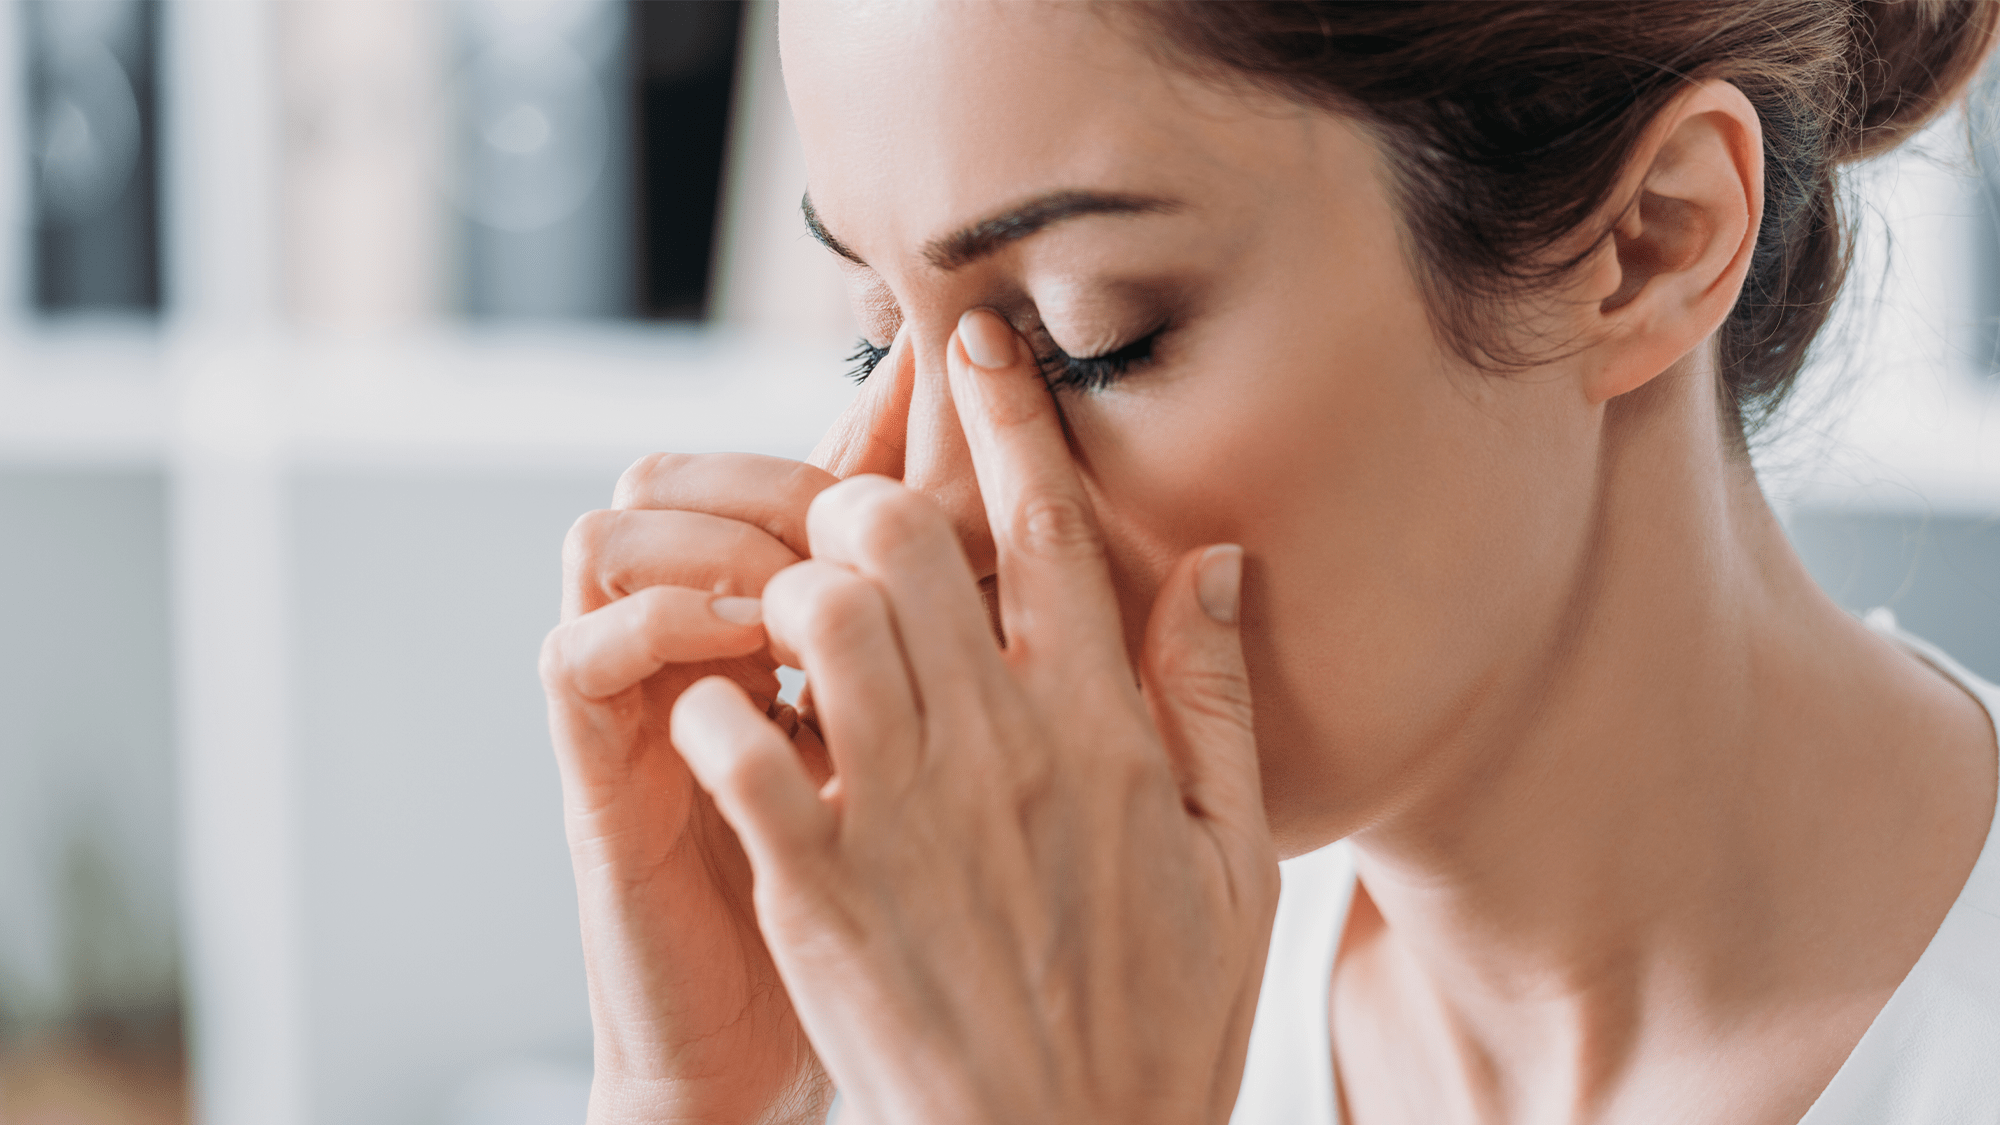 It’s stuffy nose season. Here’s how to cope